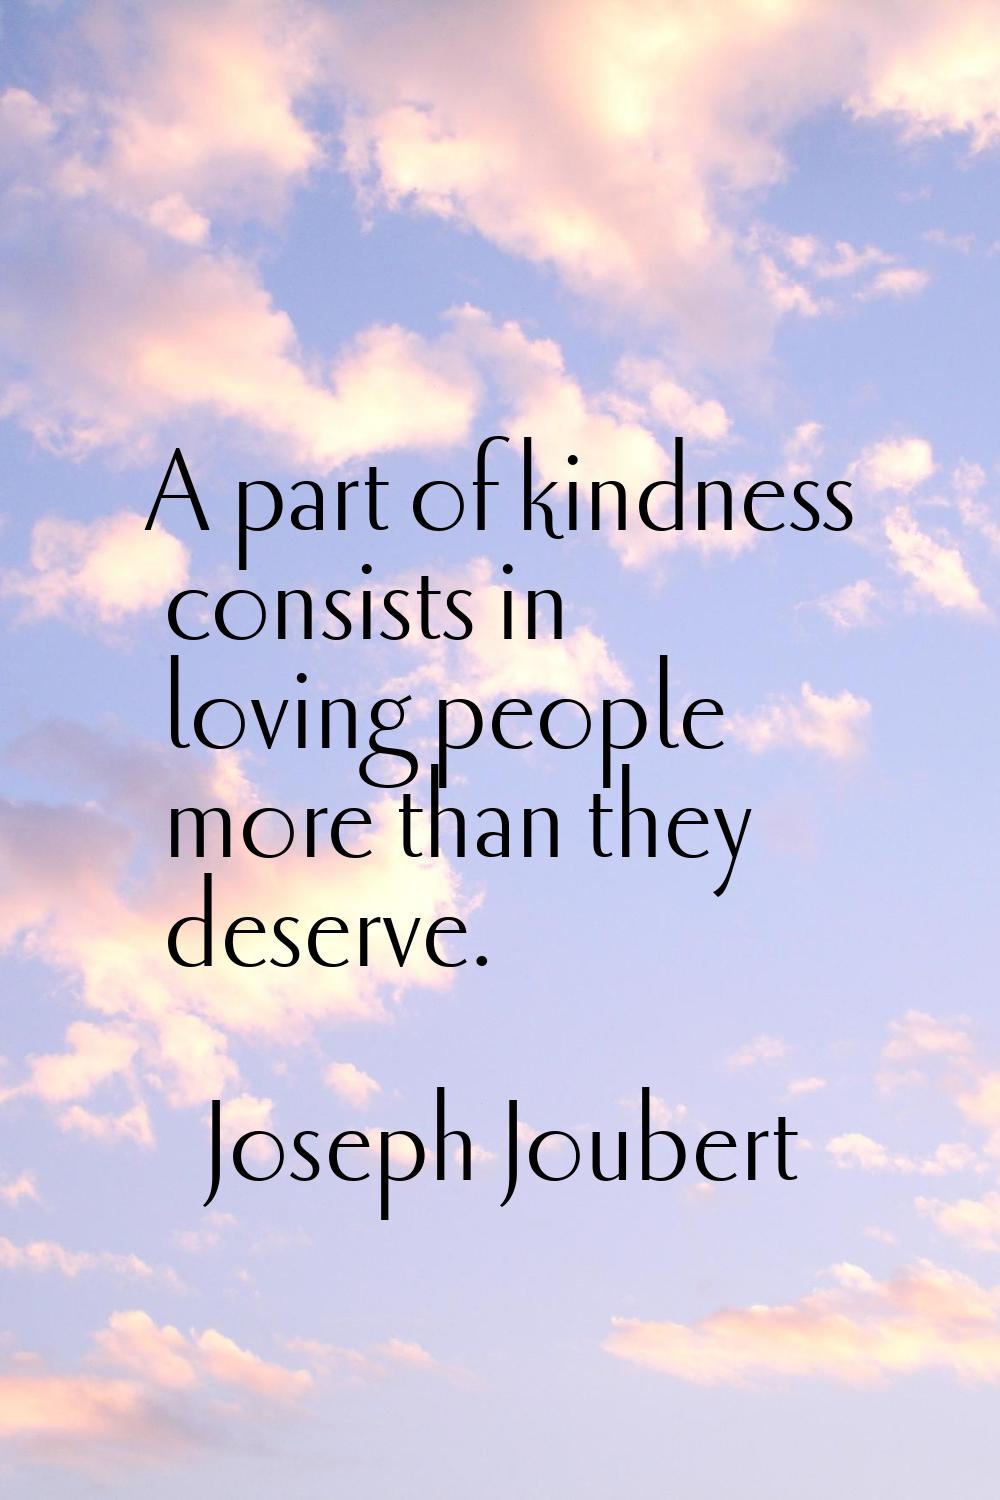 A part of kindness consists in loving people more than they deserve.